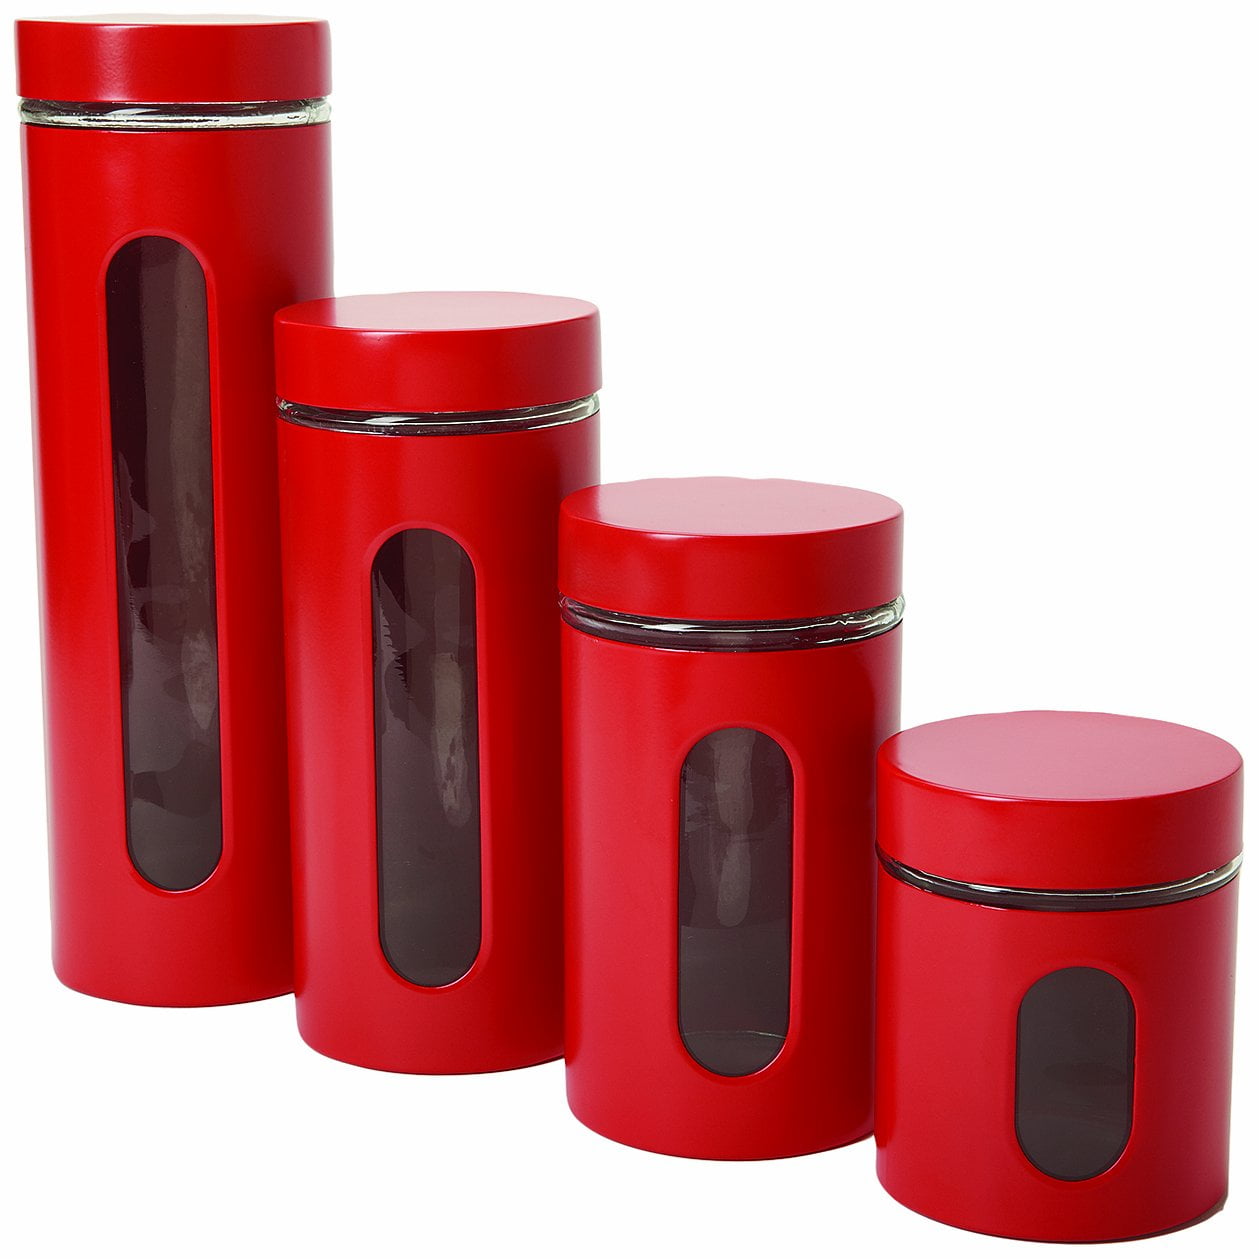 Anchor Hocking 64-Ounce Acrylic Round Canister with Clamp Top Lid Set of 4 